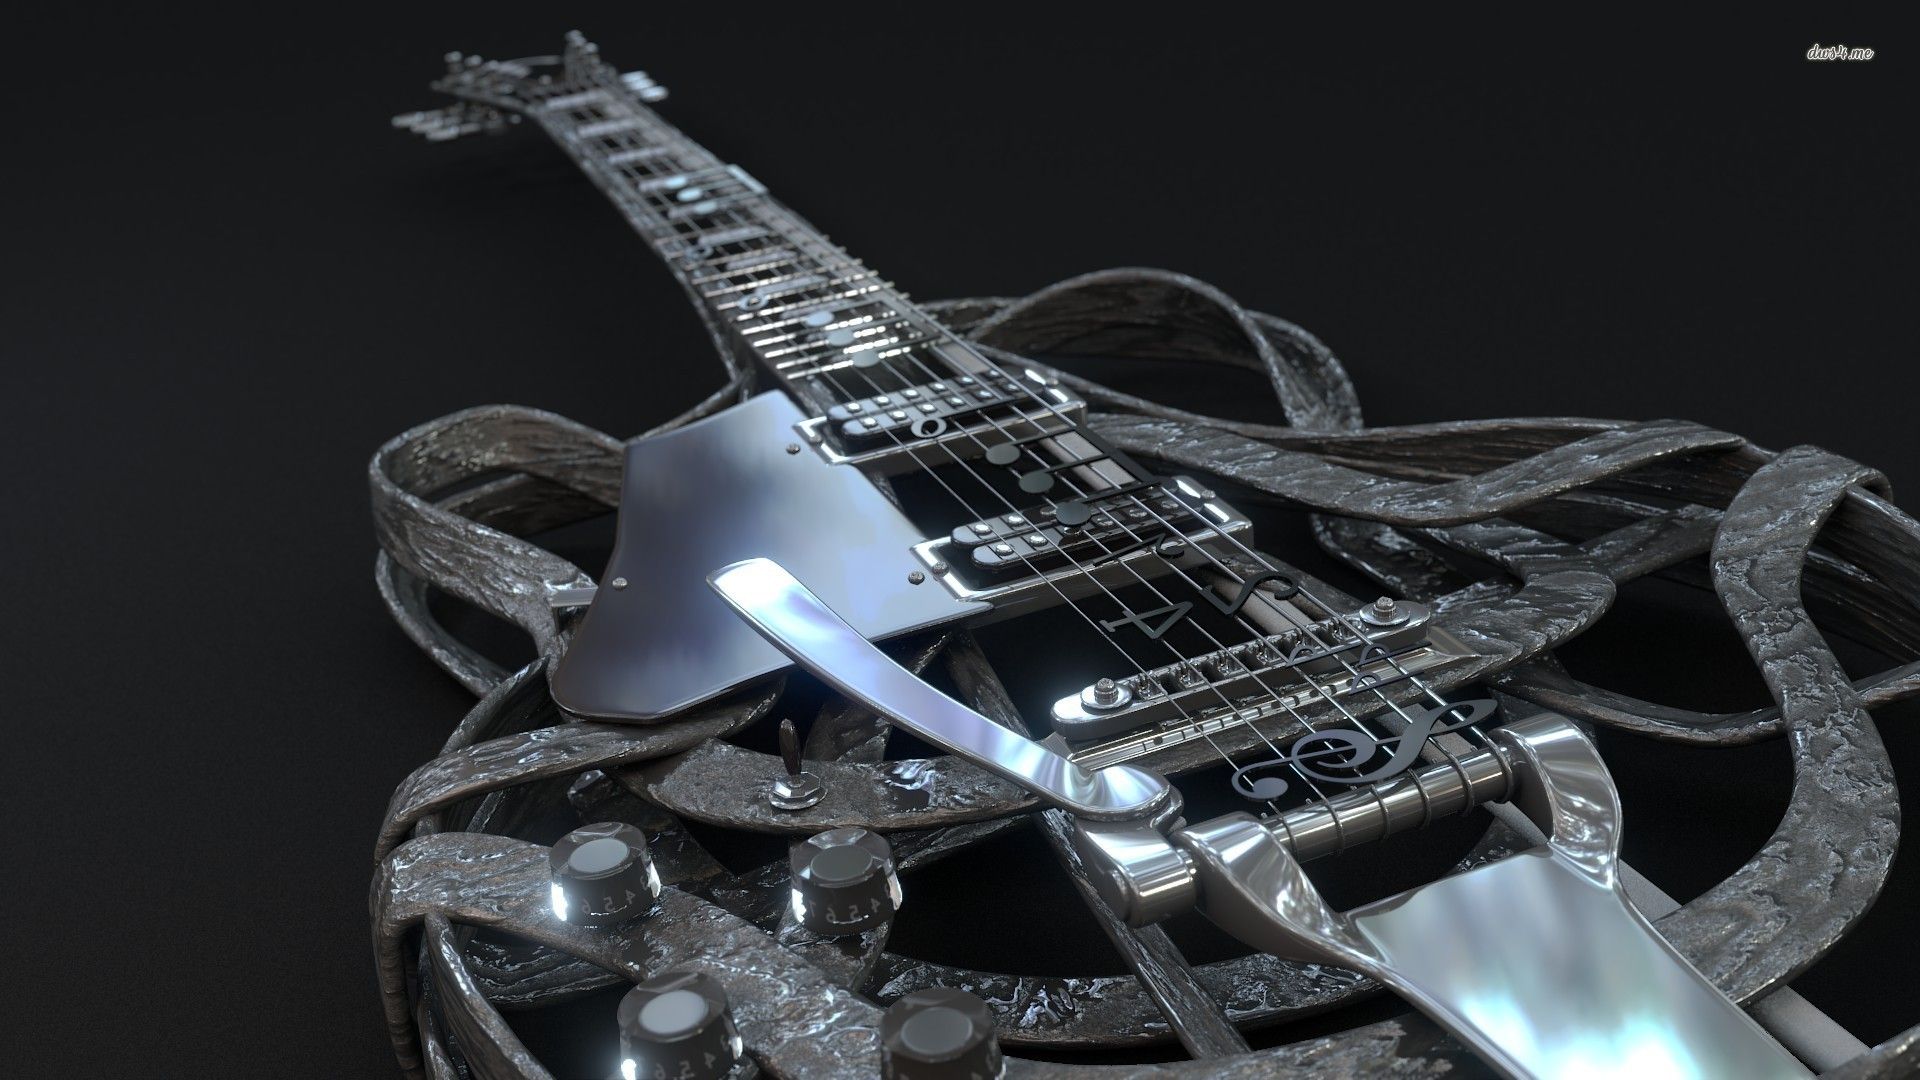 Stylized guitar wallpaper - Music wallpapers